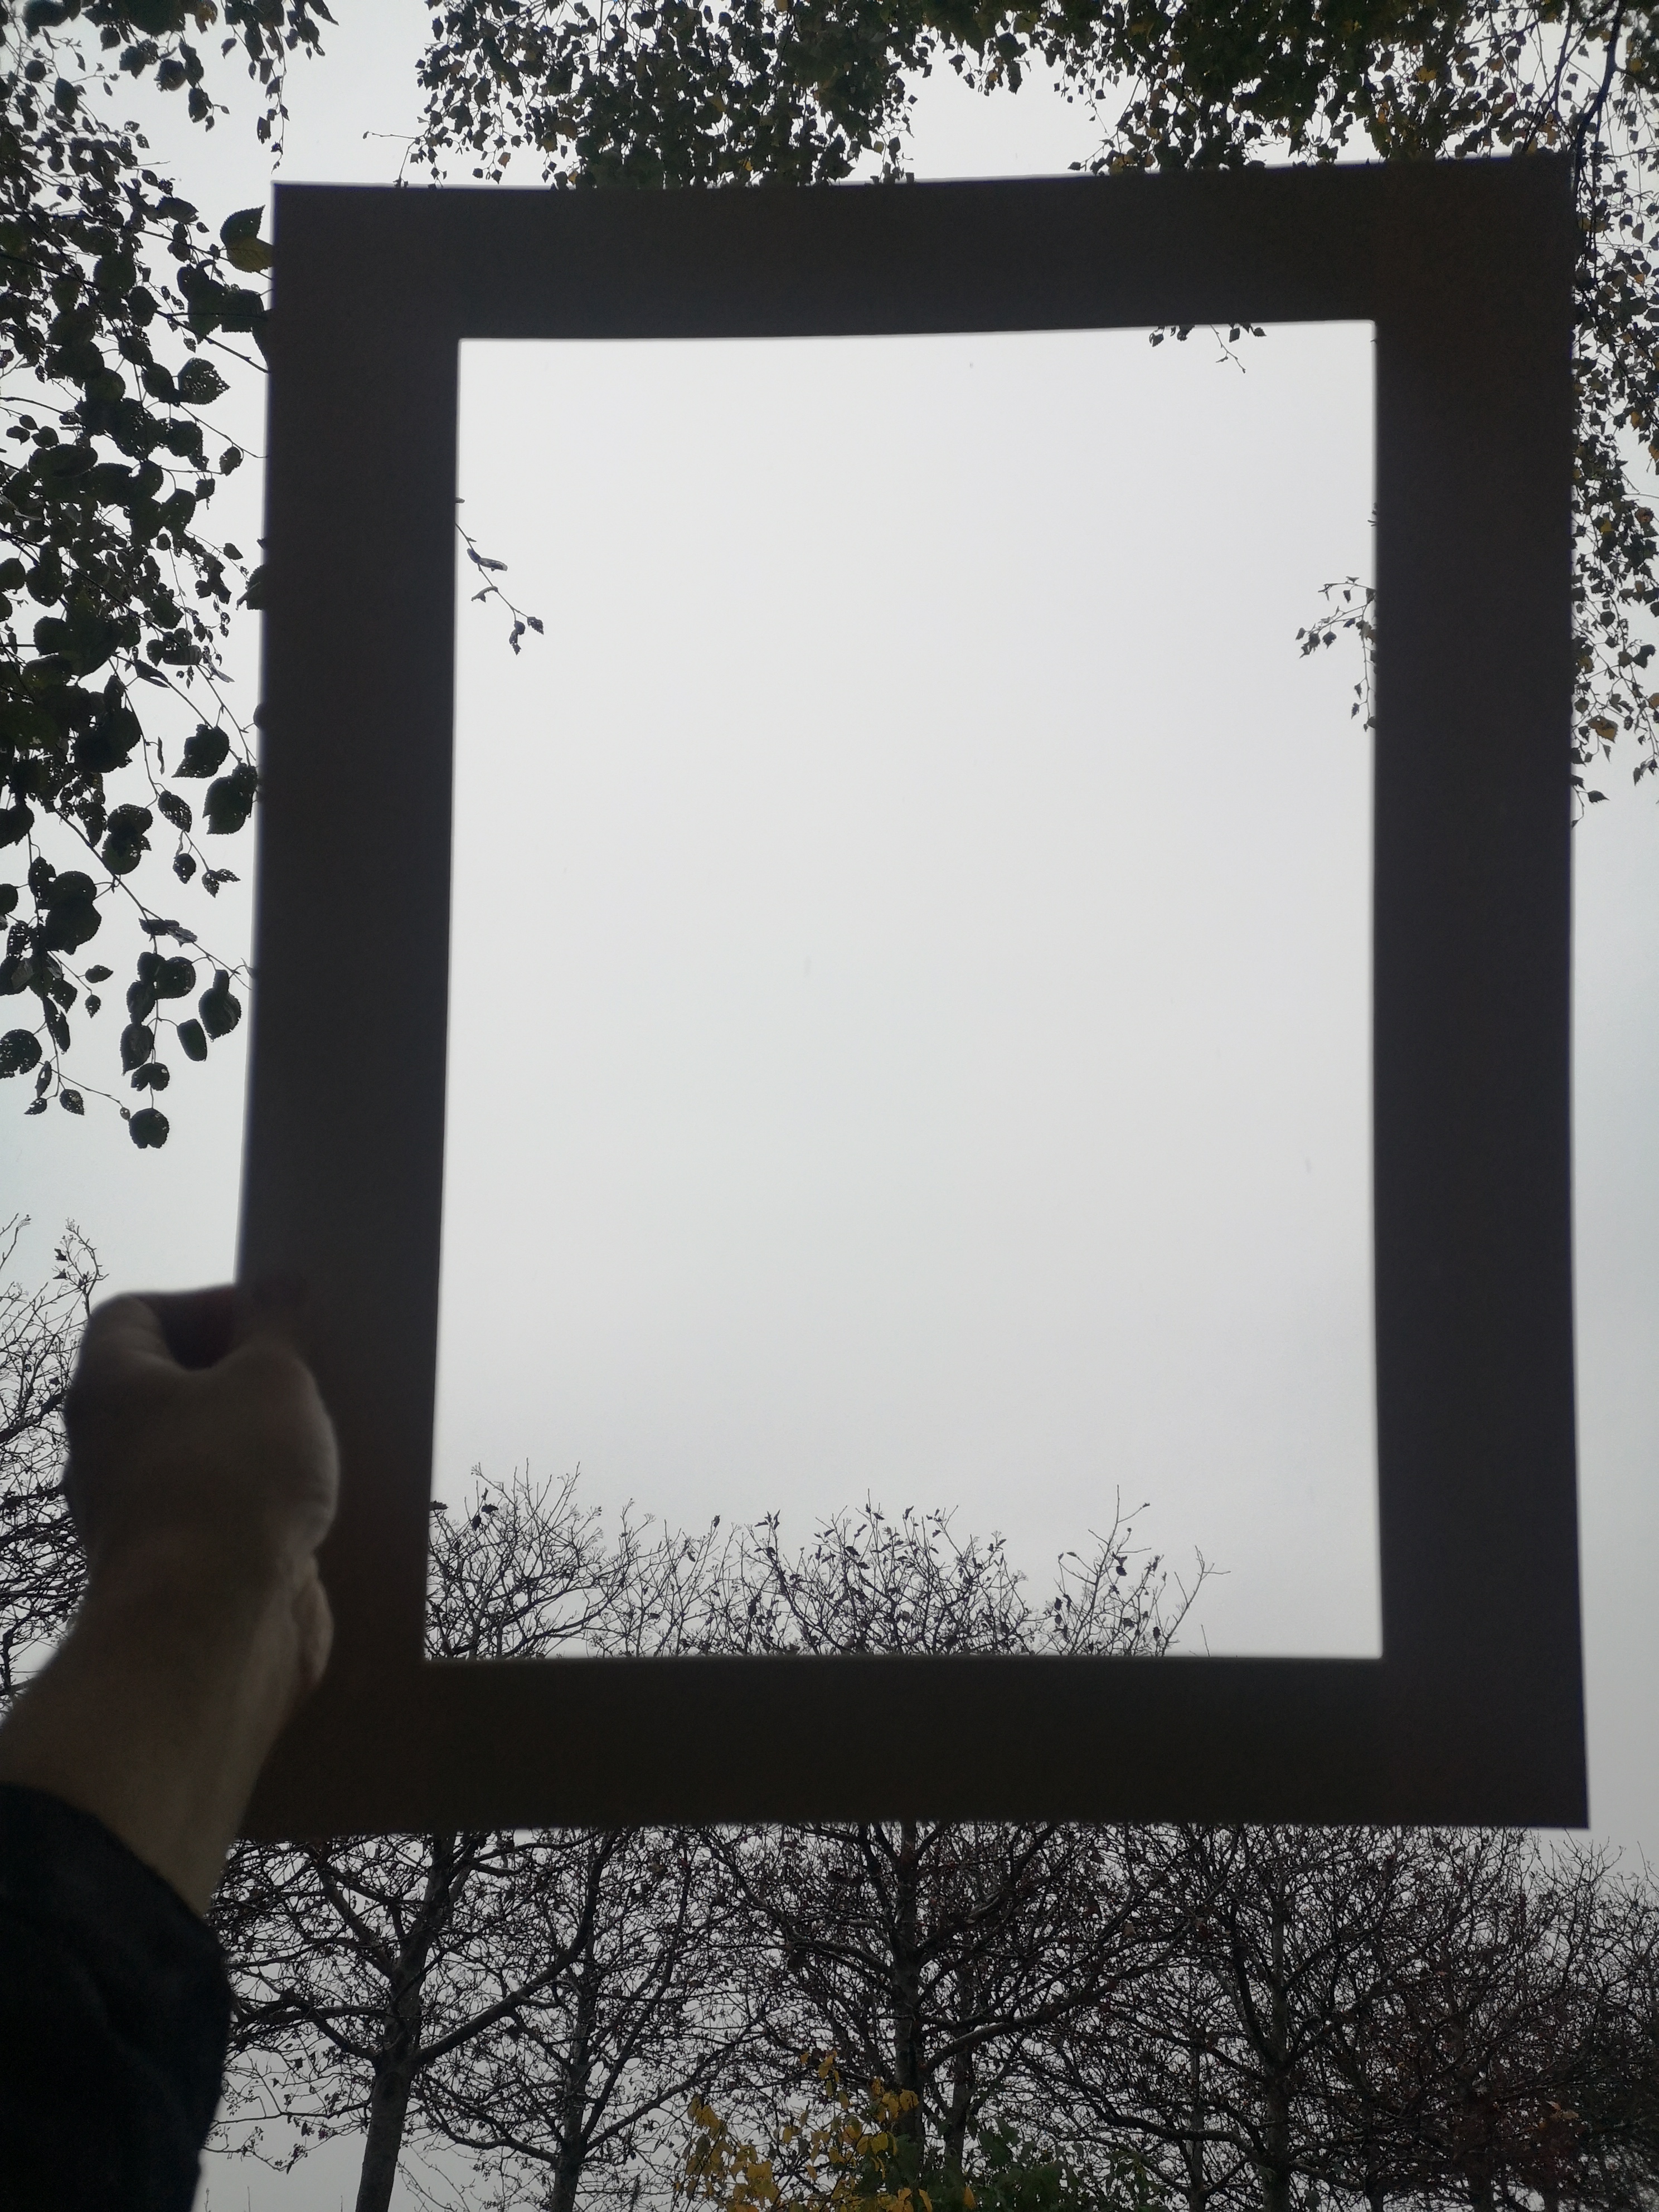 a glimpse through one of the sky frames to reveal a creamy white and gray sky with a slight slow of blocked sunlight